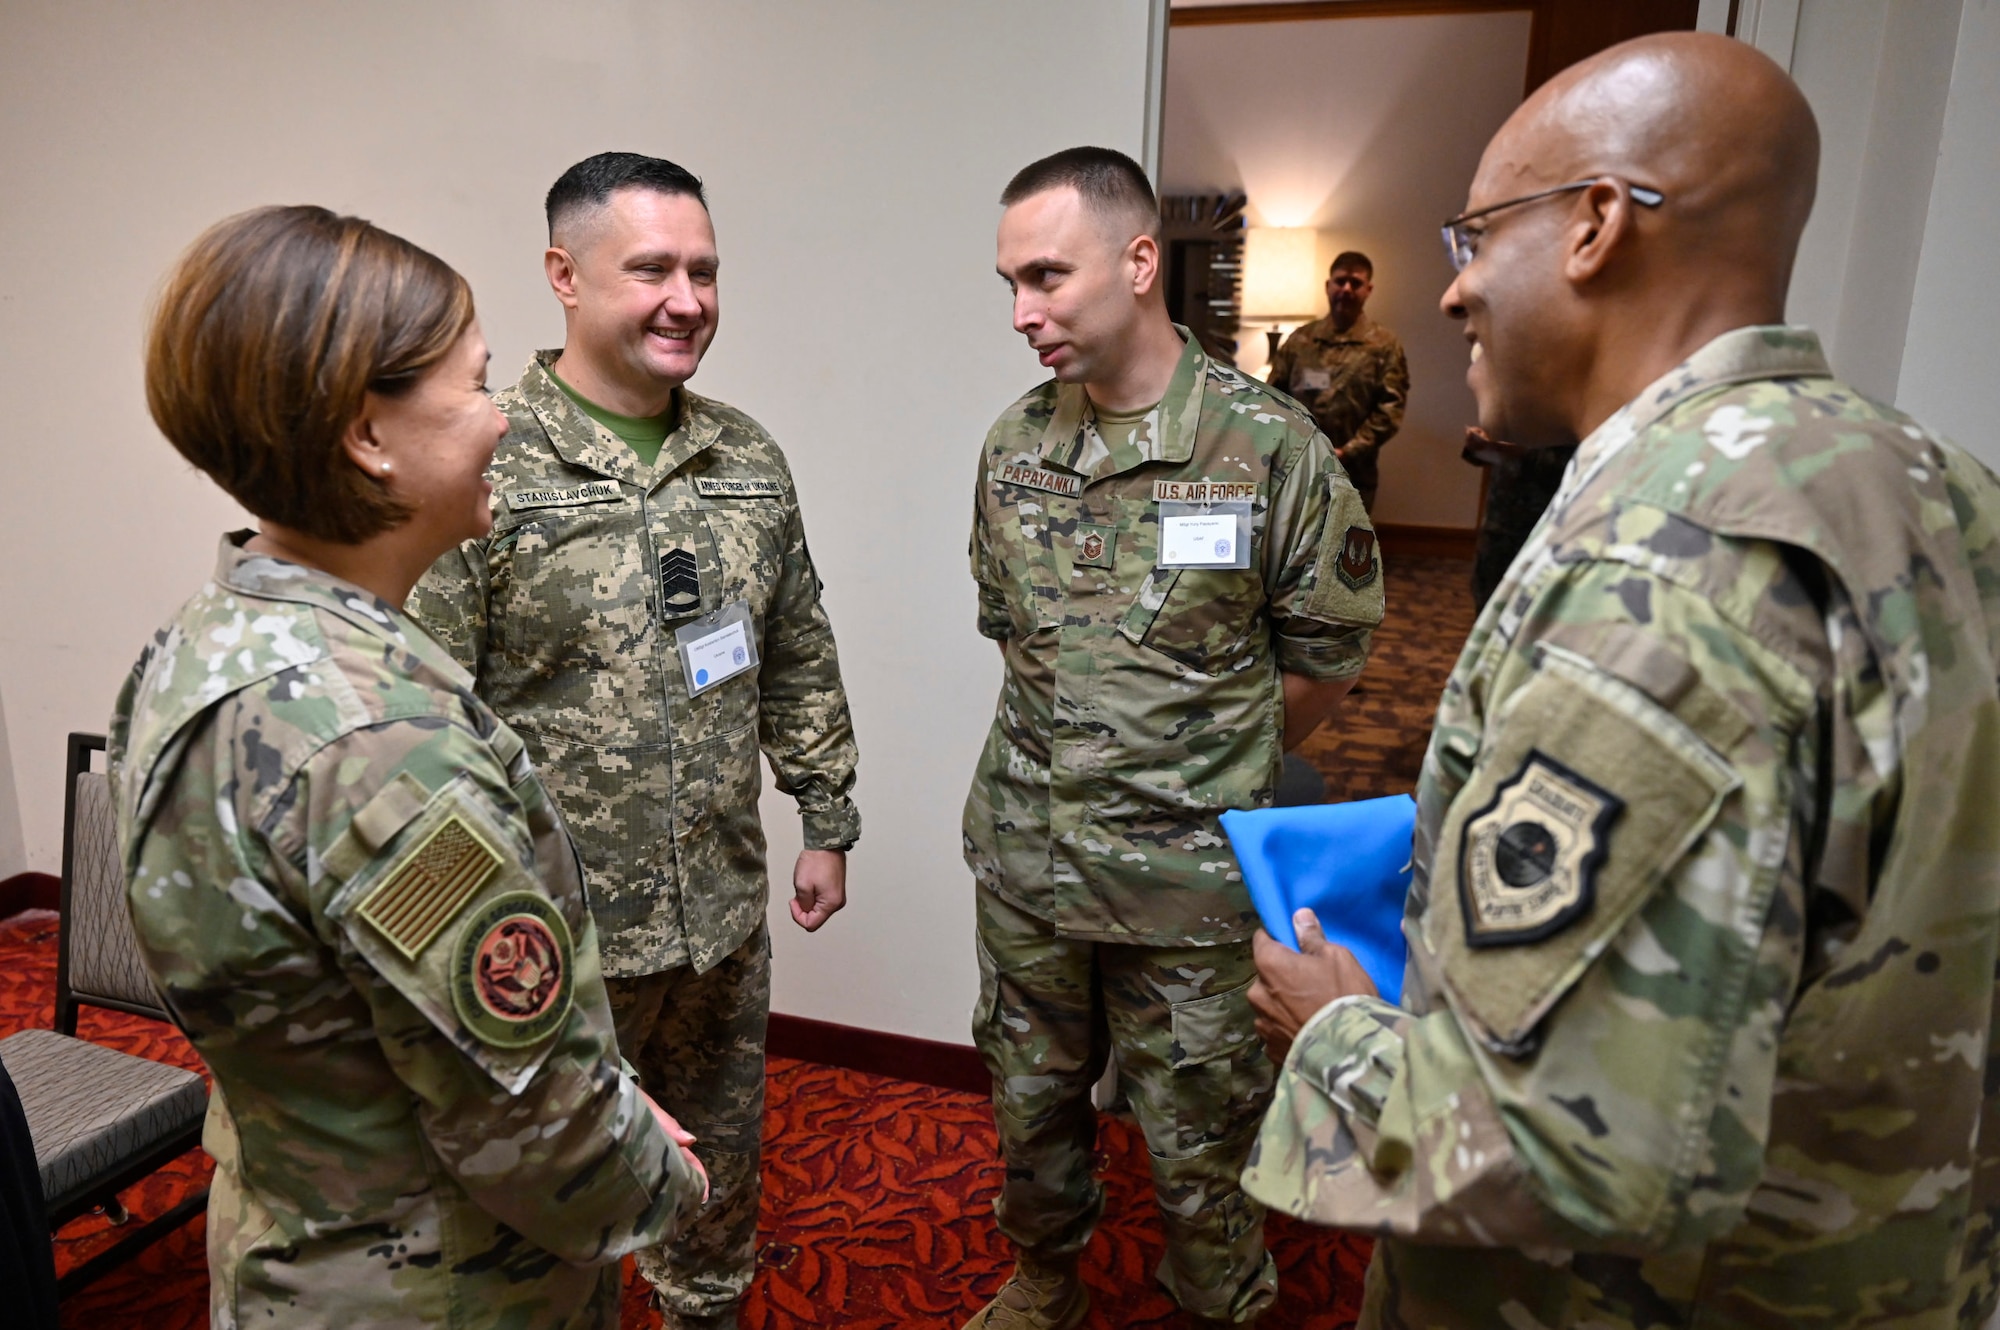 Chief Master Sergeant of the Ukrainian Air Force Kostiantyn Stanislavchuk speaks with Air Force Chief of Staff Gen. Charles Q. Brown Jr., right, and Chief Master Sgt. of the Air Force JoAnne S. Bass, left, during the Senior Enlisted Leader International Summit in Arlington, Va., Aug. 1, 2022. Master Sgt. Yuriy Papayanki, 97th Healthcare Operations Squadron medical administration technician, served as a translator and escort for Chief Stanislavchik. (U.S. Air Force photo by Eric Dietrich)